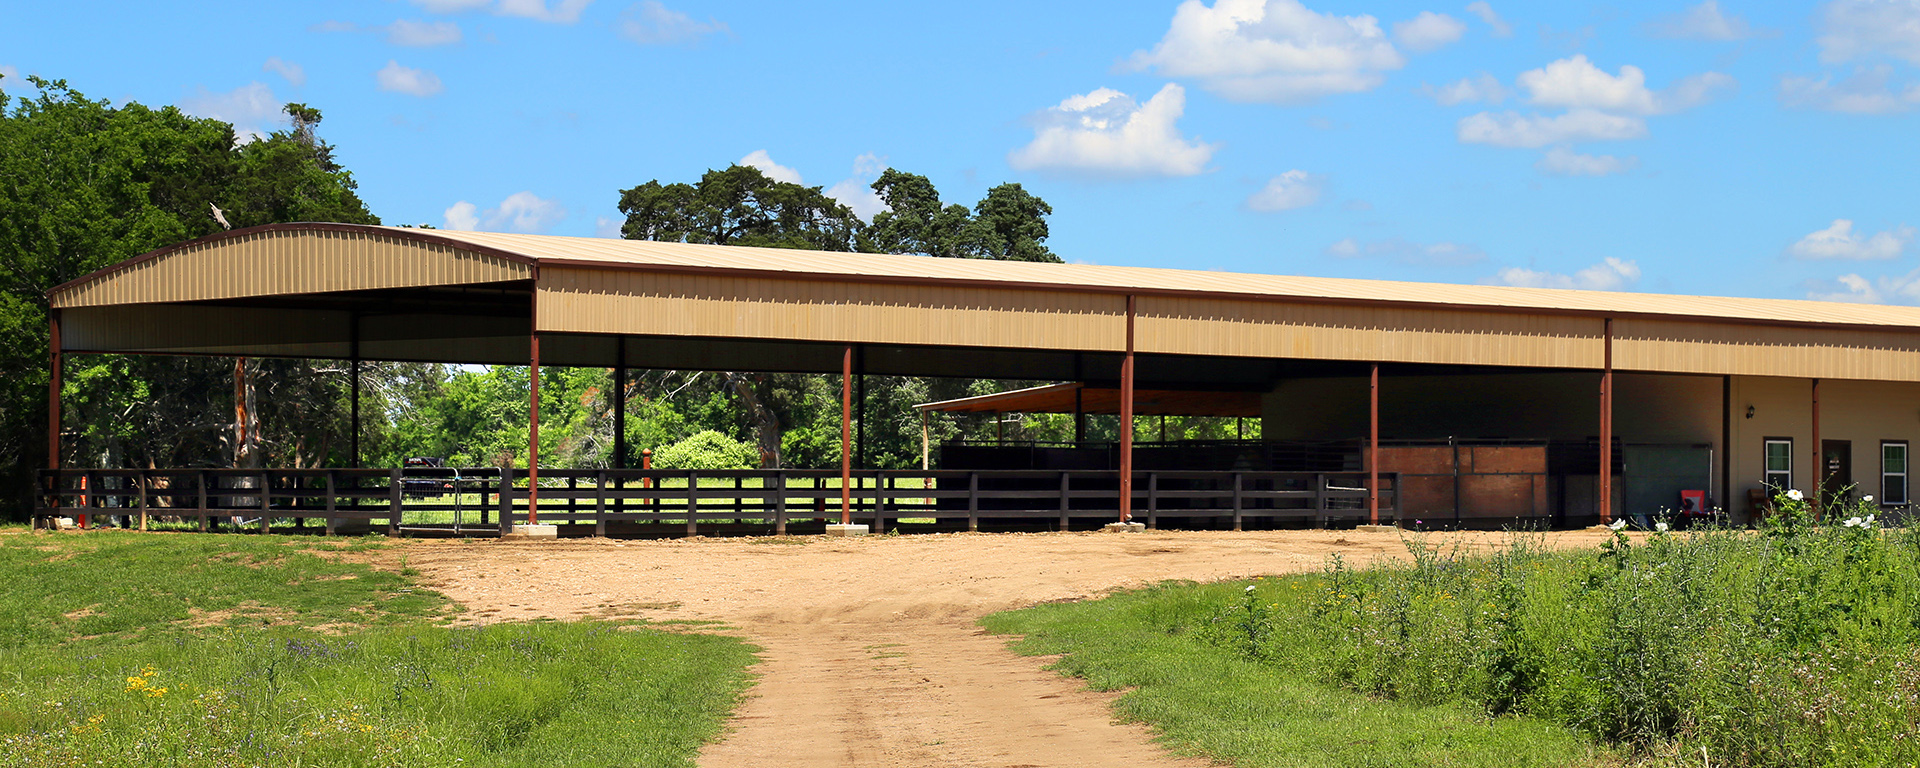 Stables at SSS Paso Fino